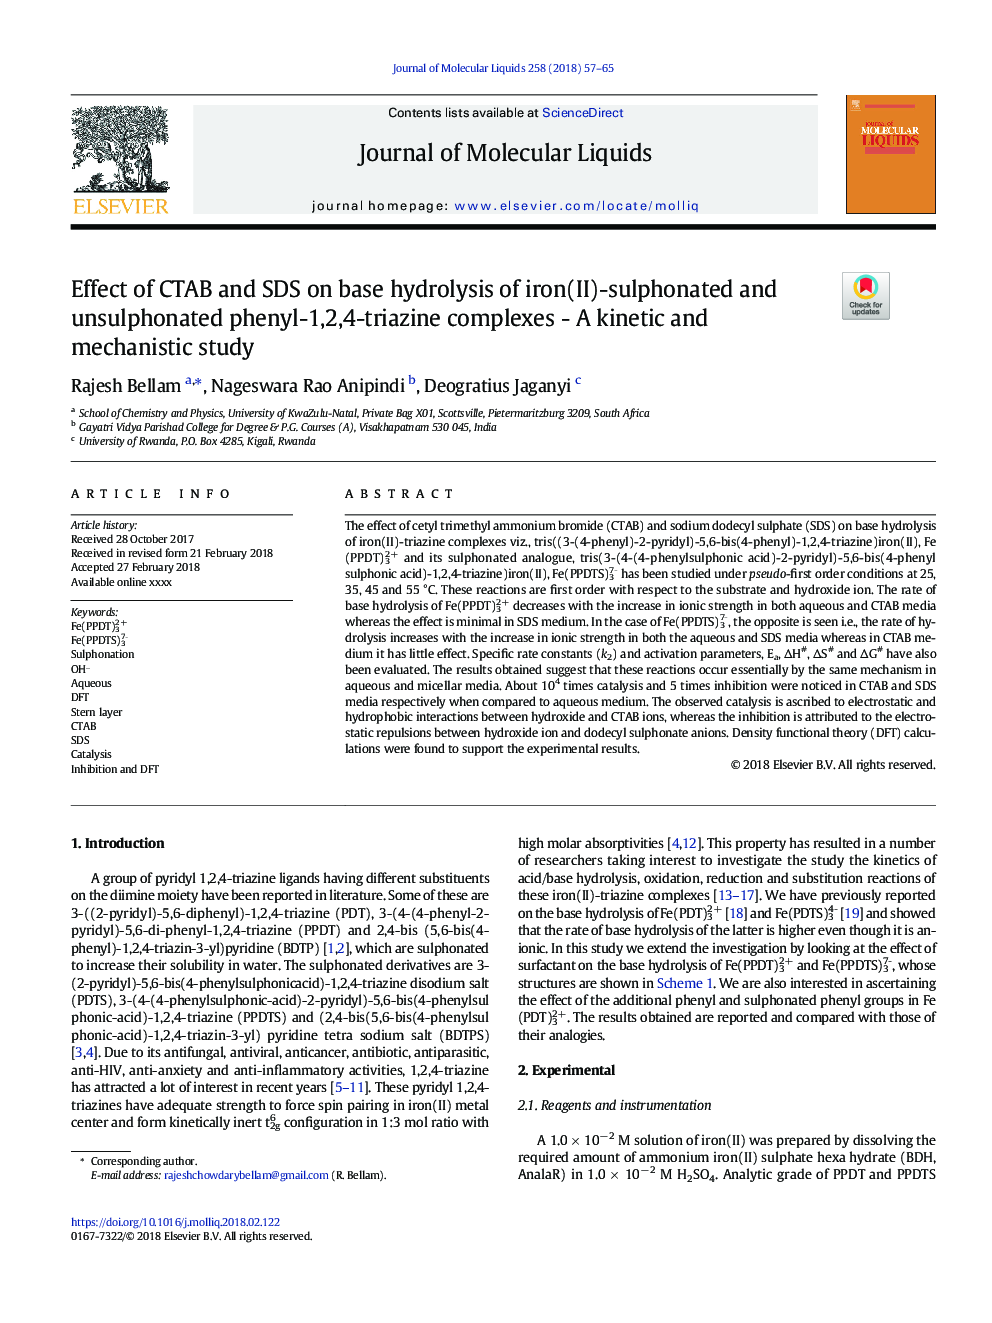 Effect of CTAB and SDS on base hydrolysis of iron(II)-sulphonated and unsulphonated phenyl-1,2,4-triazine complexes - A kinetic and mechanistic study